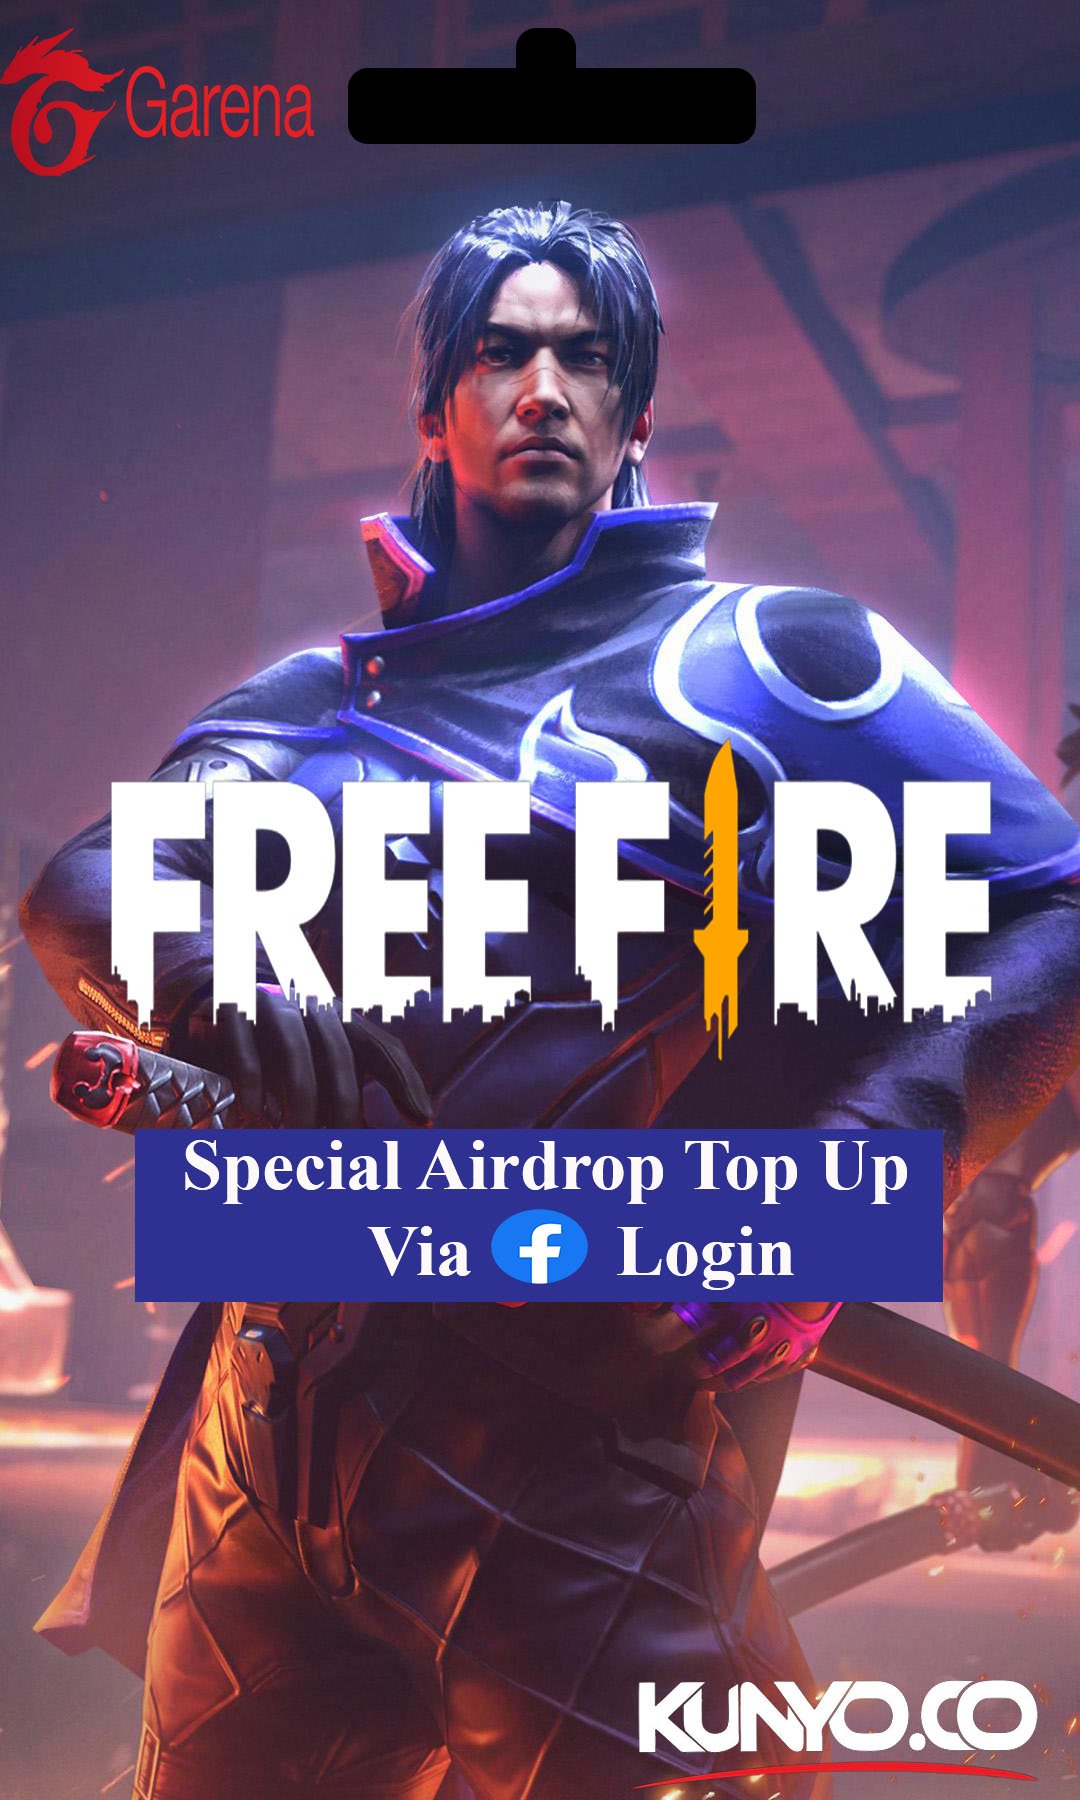 Free Fire Special Airdrops (1$-2$ airdrops only)